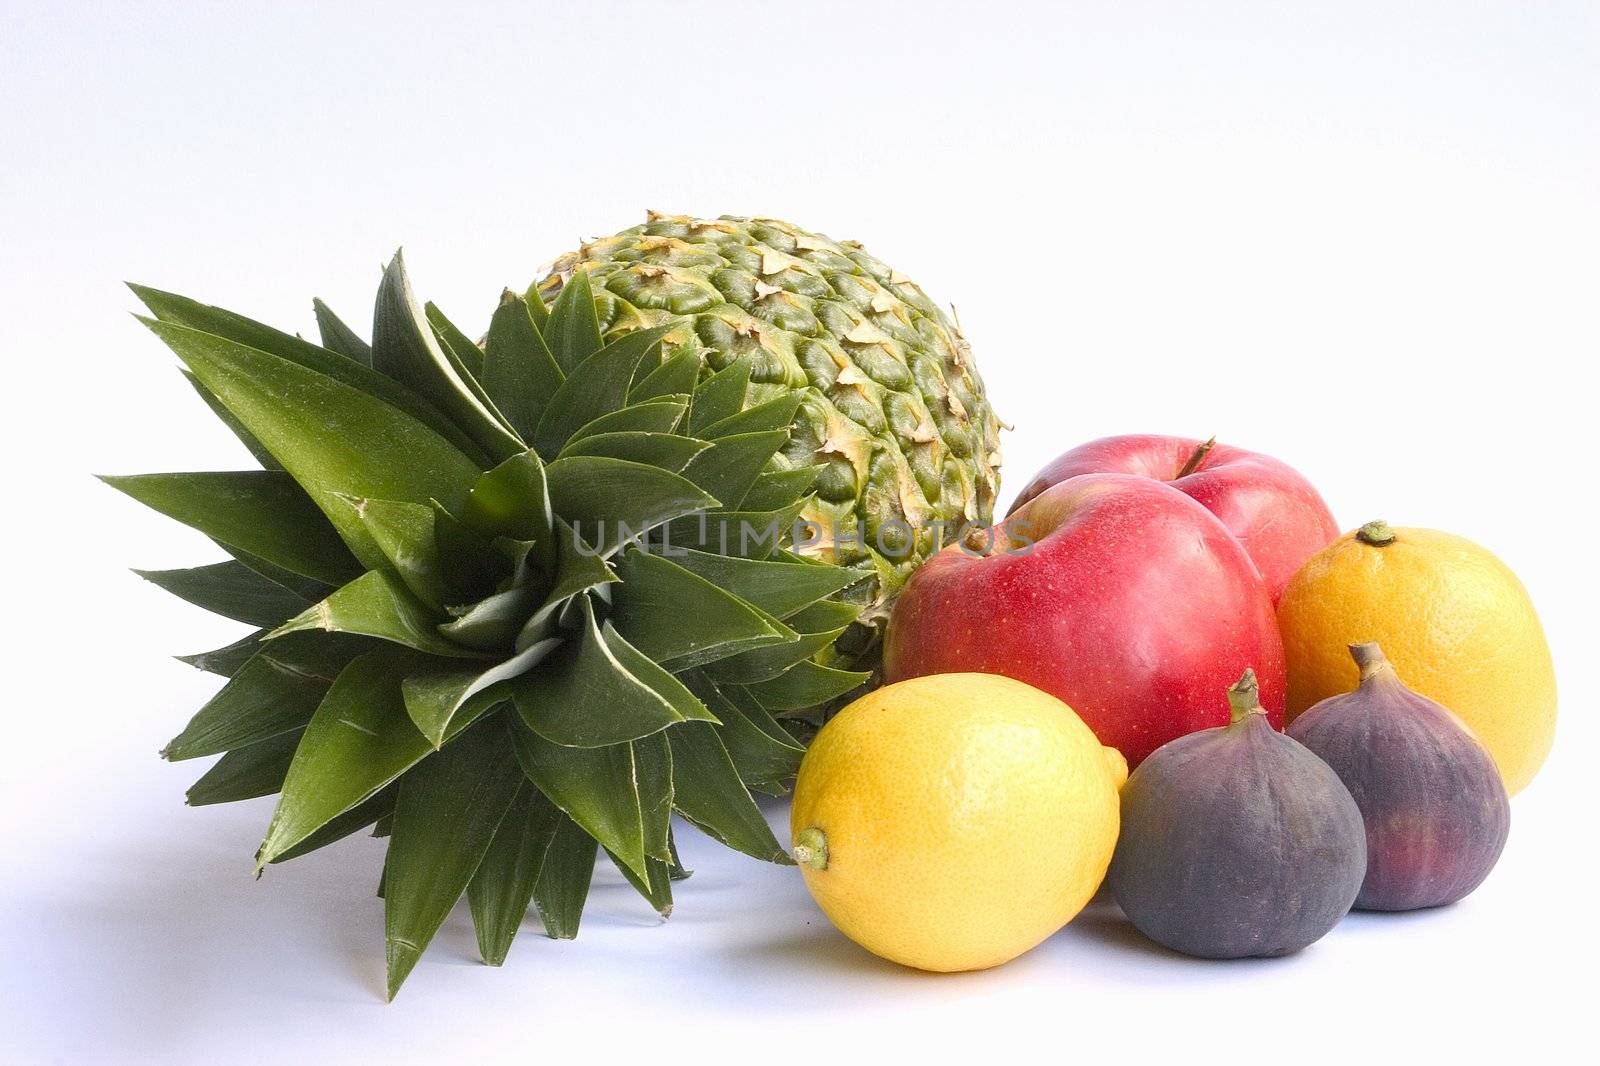 Ananas and other fruits isolated on white background.